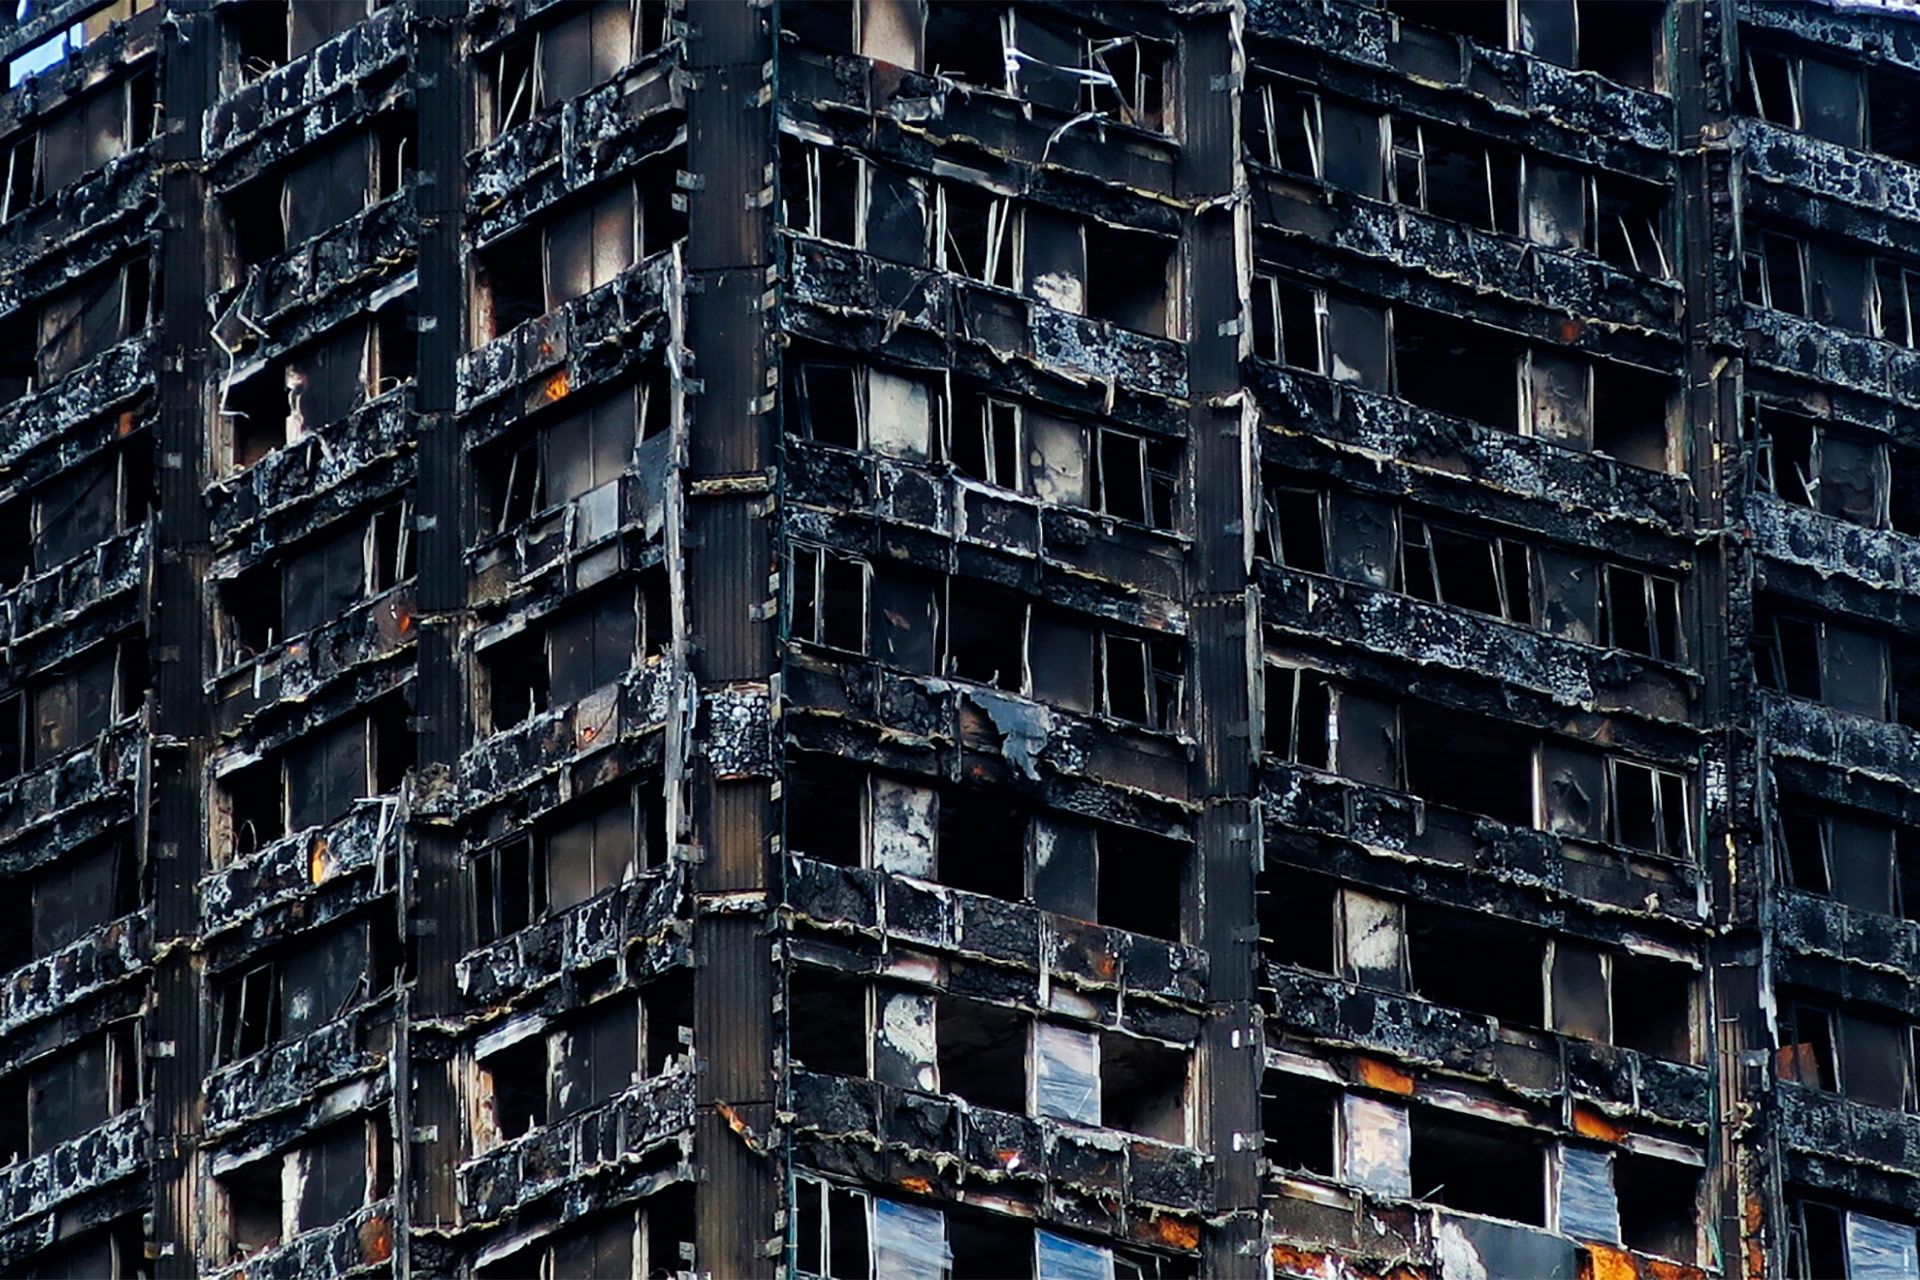 Photo of tower block fire aftermath